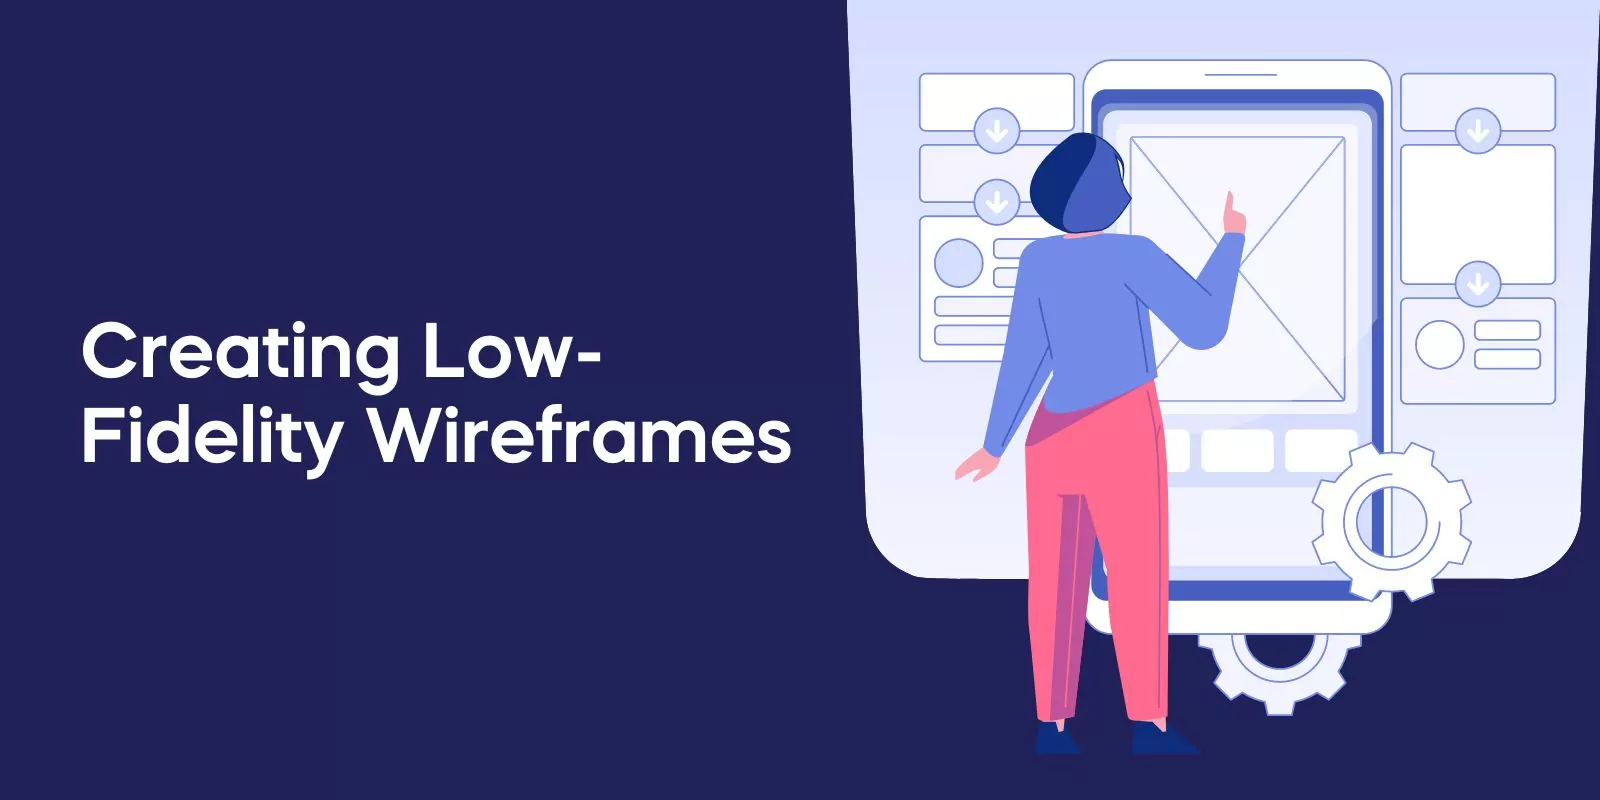 Creating Low-Fidelity Wireframes